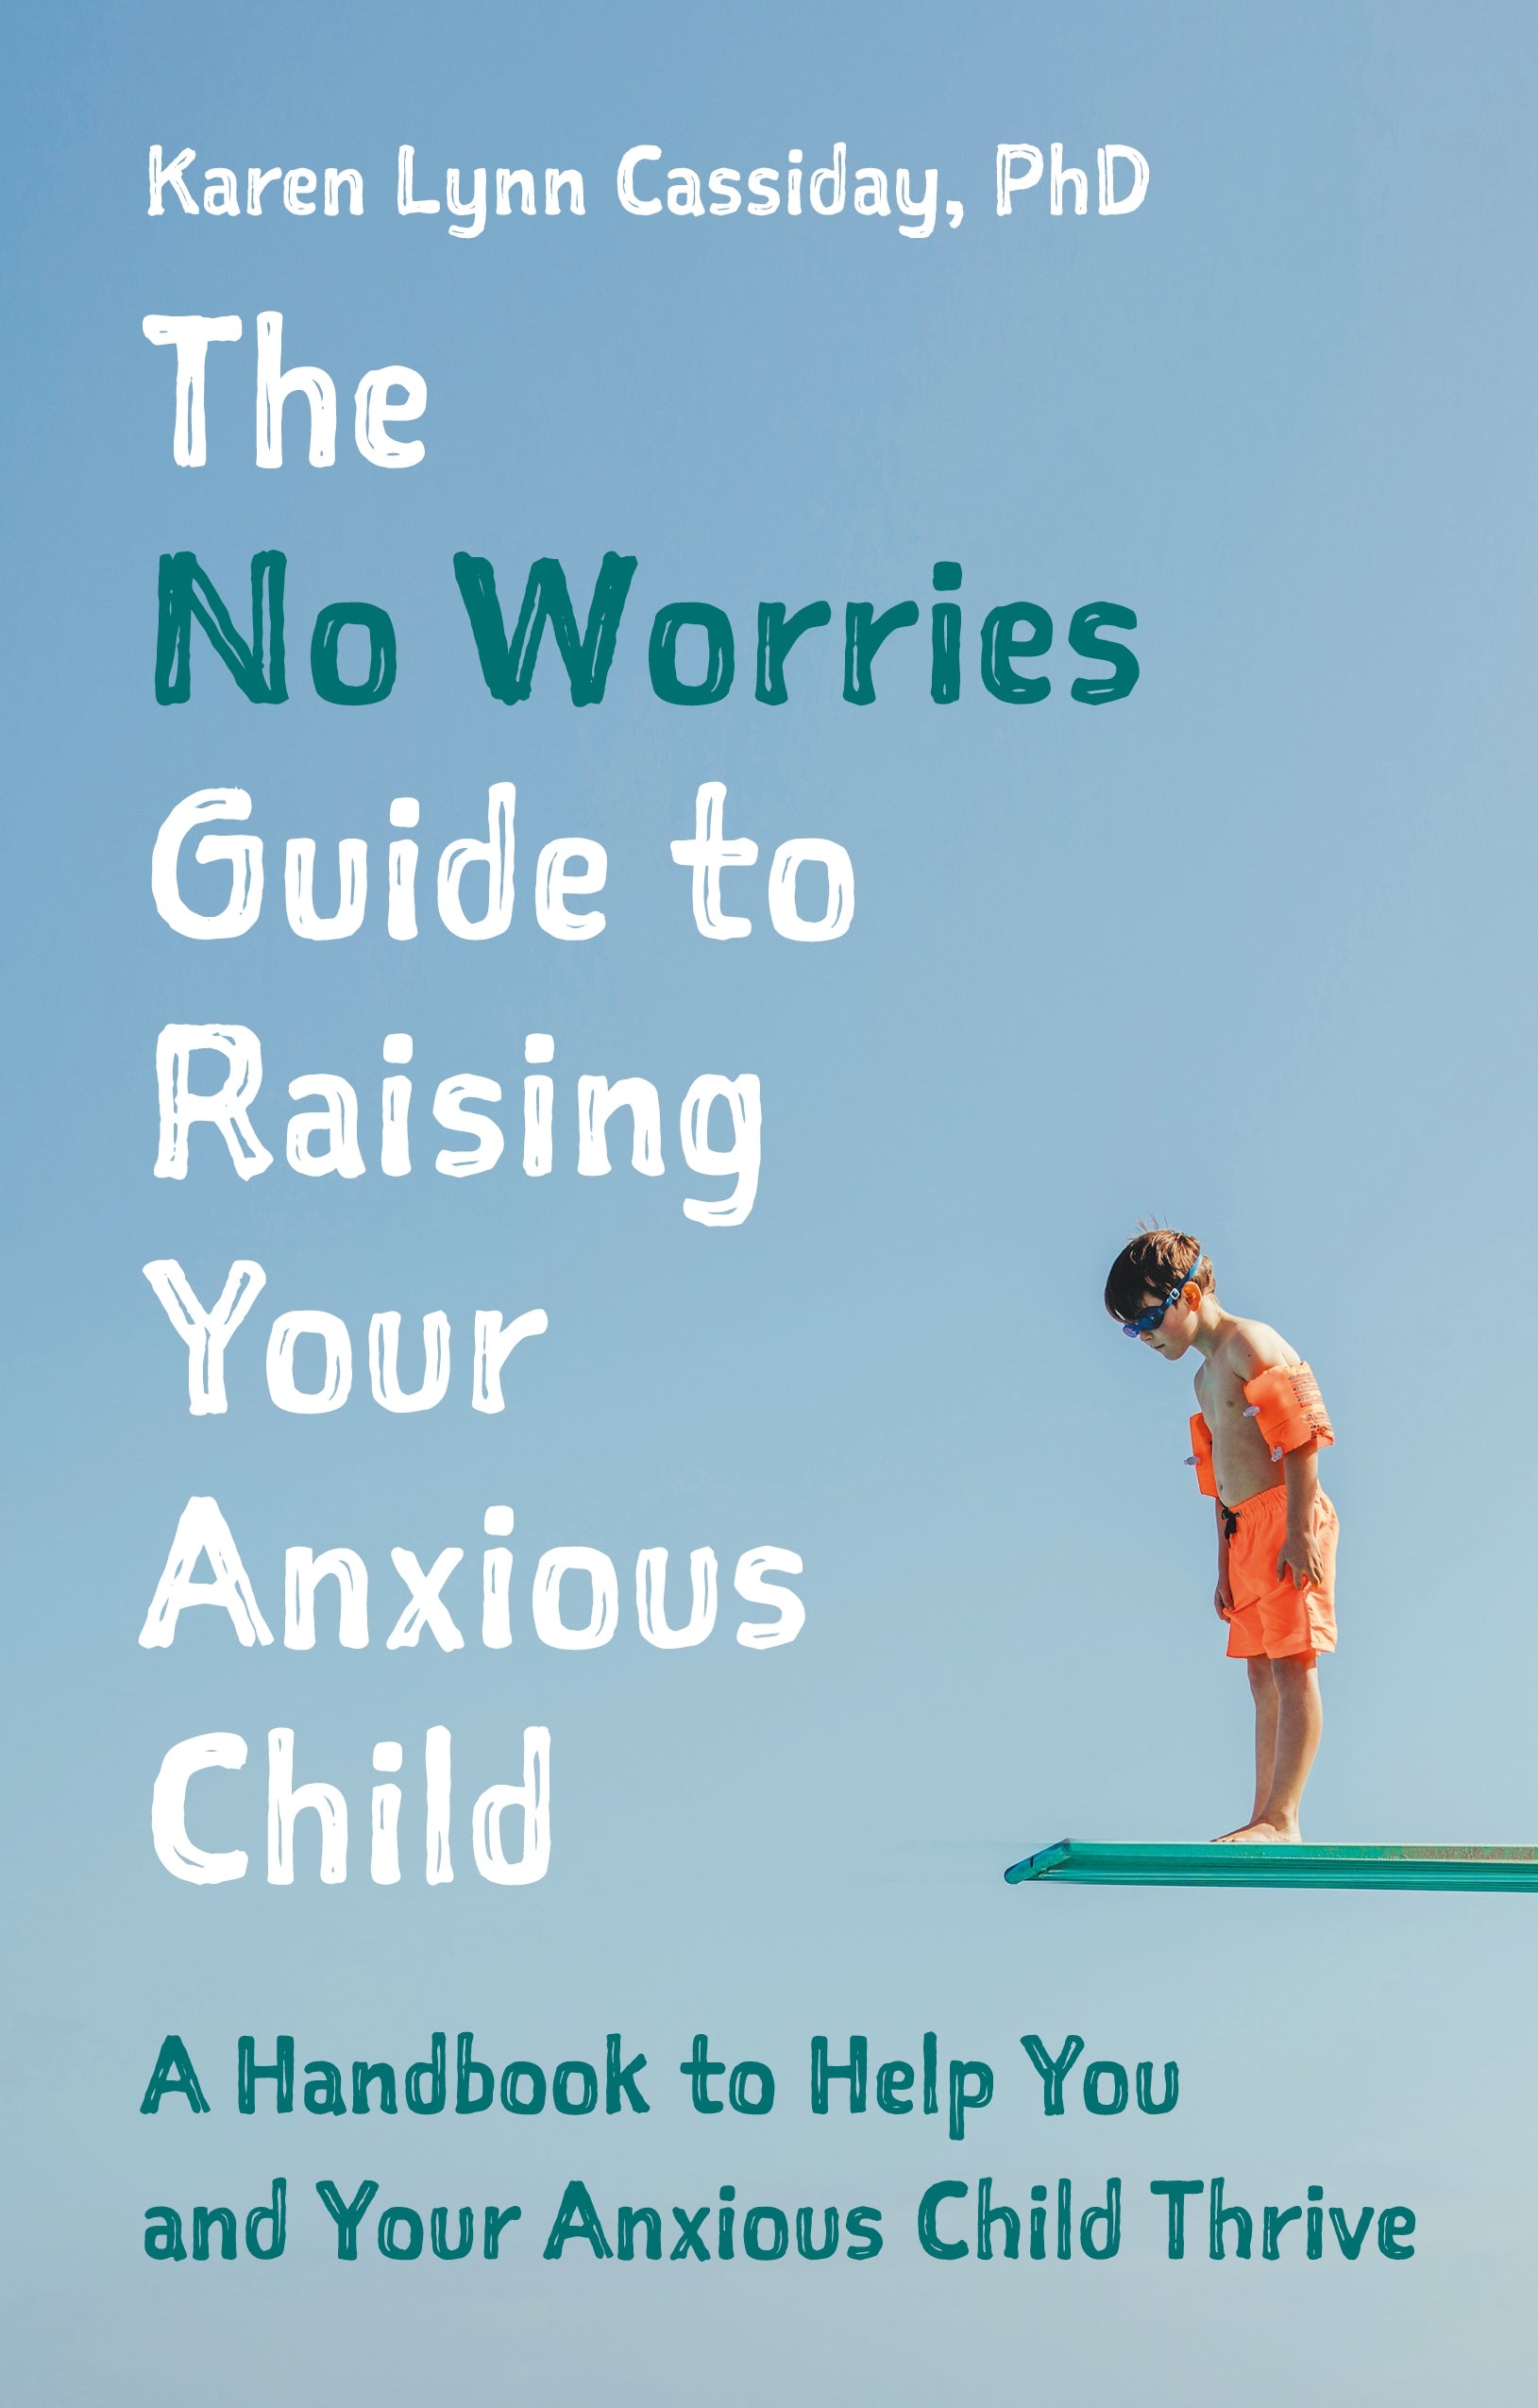 The No Worries Guide to Raising Your Anxious Child by Karen Lynn Cassiday